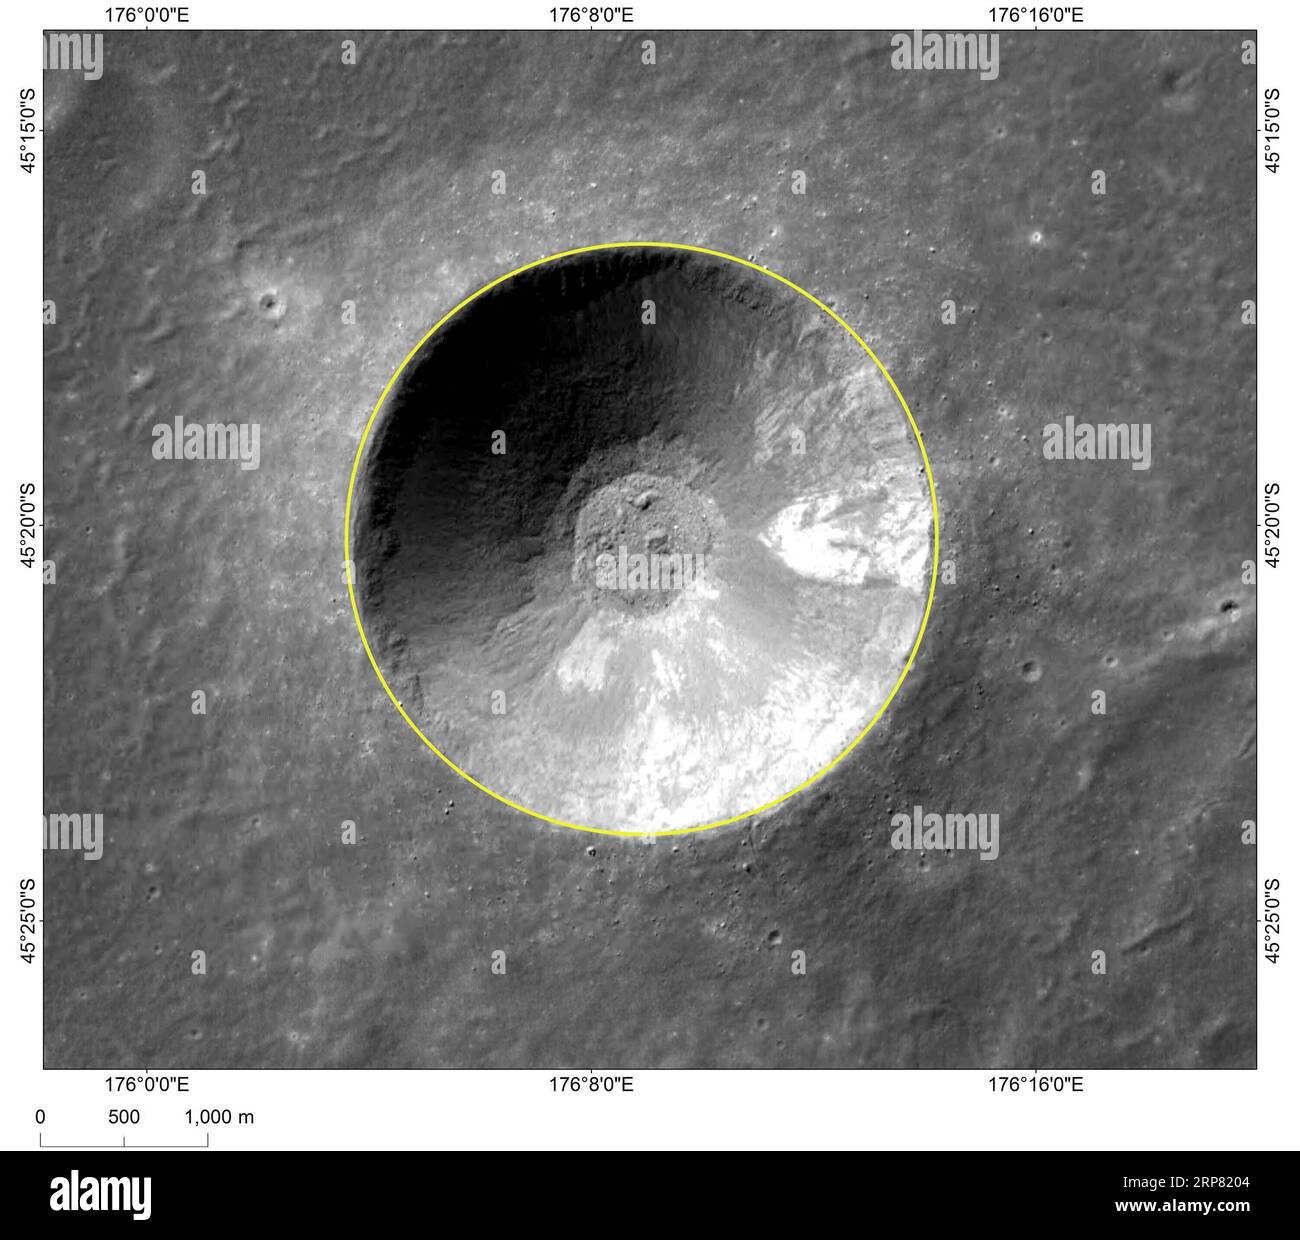 (190215) -- BEIJING, Feb. 15, 2019 (Xinhua) -- Photo provided by the China National Space Administration (CNSA) shows the image of Zhinyu, a crater near Statio Tianhe , the landing site of China s Chang e-4 lunar probe. The landing site of China s Chang e-4 lunar probe has been named Statio Tianhe after the spacecraft made the first-ever soft landing on the far side of the moon last month. Together with three nearby impact craters and one hill, the name was approved by the International Astronomical Union (IAU), Liu Jizhong, director of the China Lunar Exploration and Space Engineering Center Stock Photo